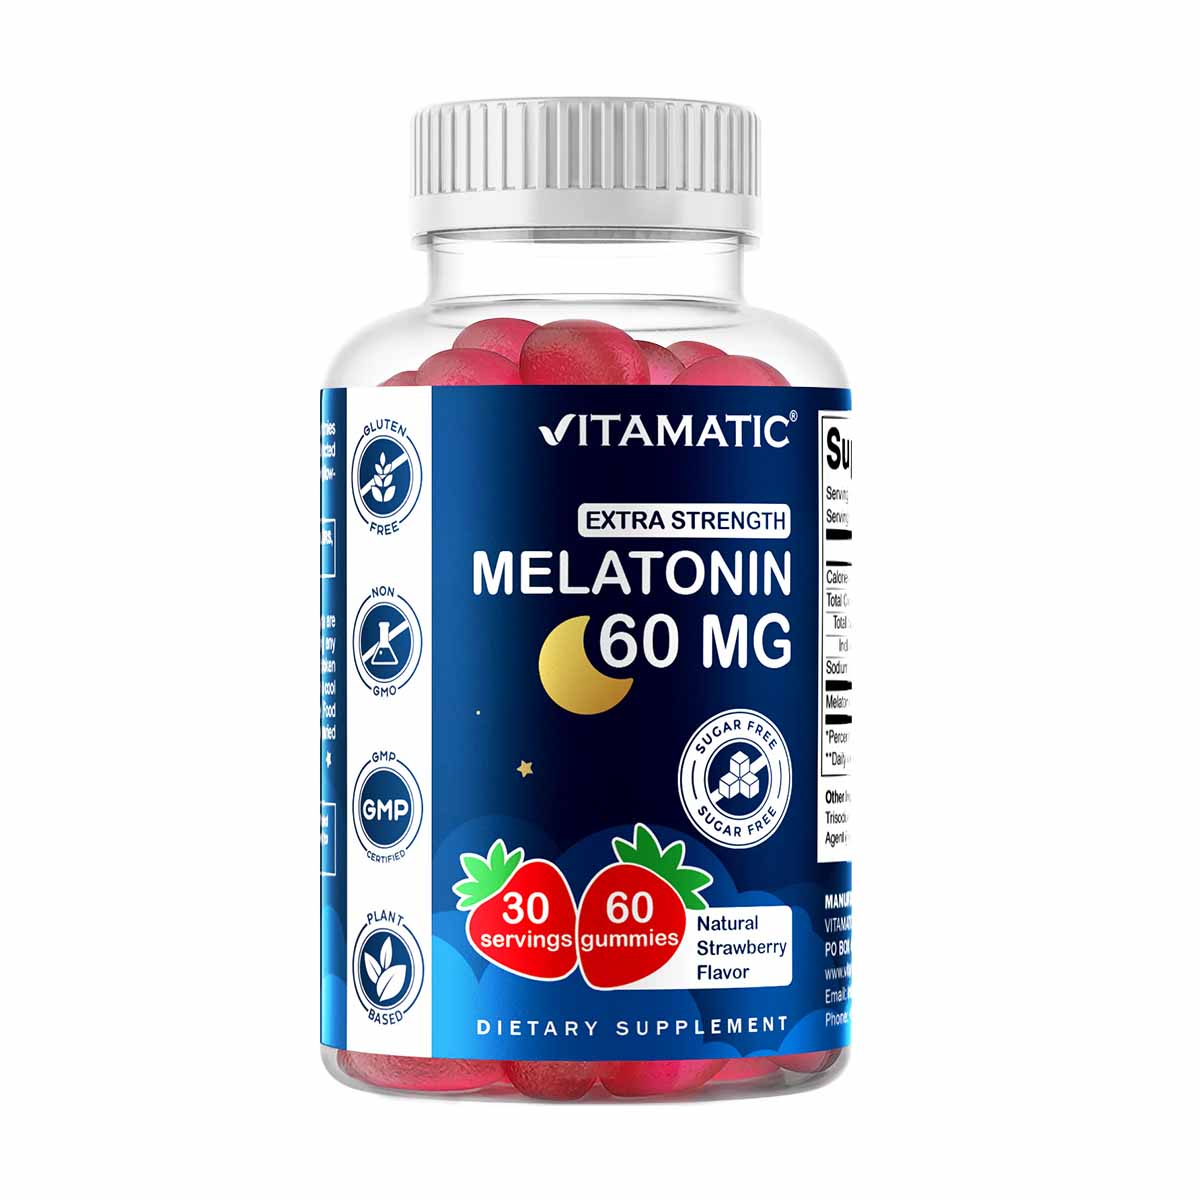 clear plastic jar of Vitamatic Sugar Free Melatonin Gummies with blue label and filled with bright red gummies